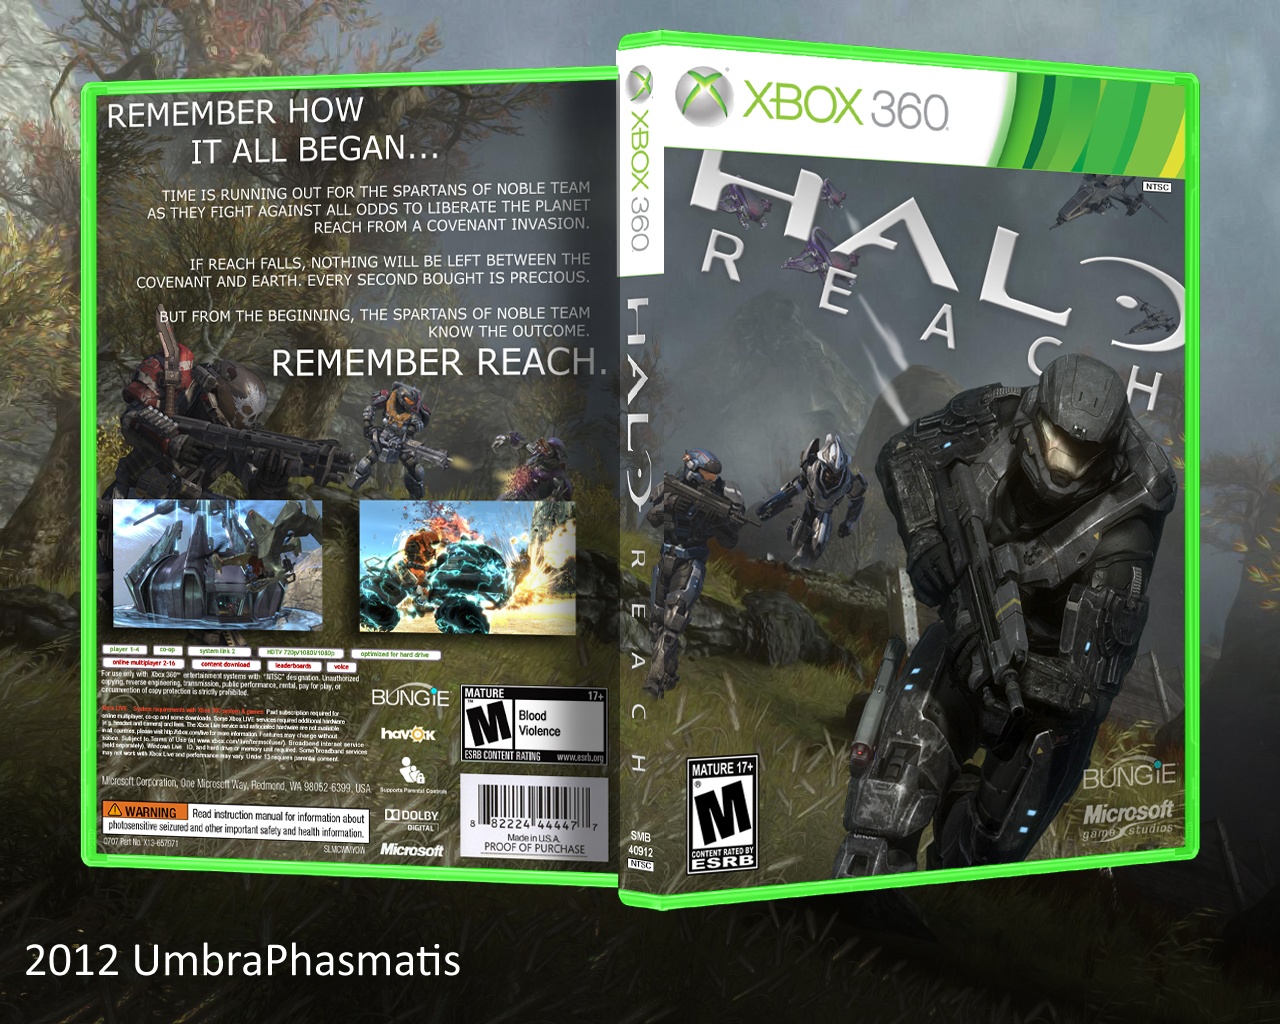 Viewing full size Halo: Reach box cover